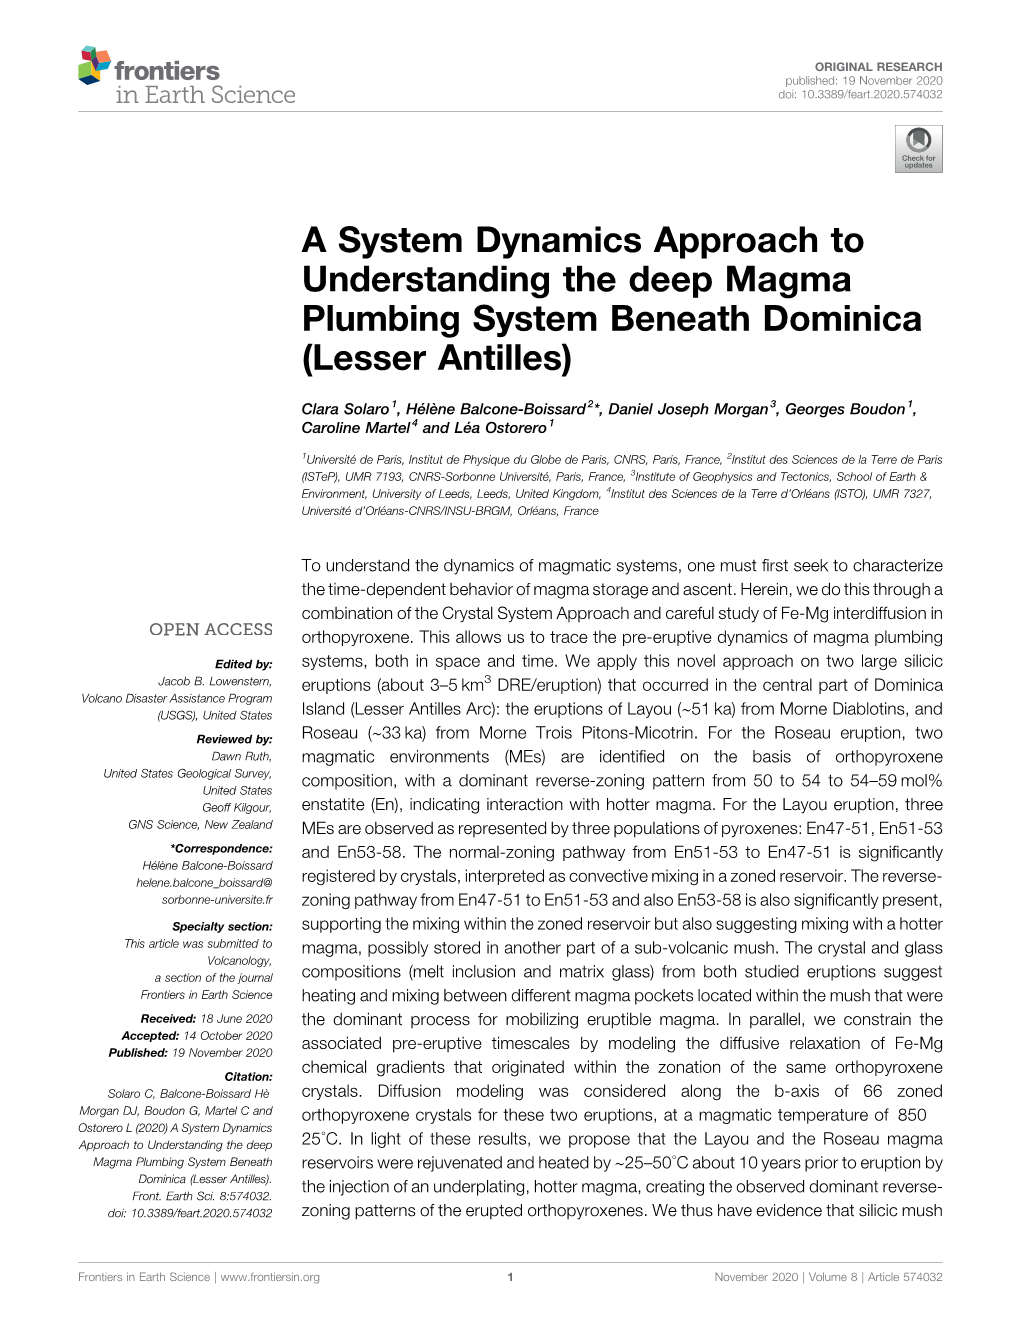 A System Dynamics Approach to Understanding the Deep Magma Plumbing System Beneath Dominica (Lesser Antilles)